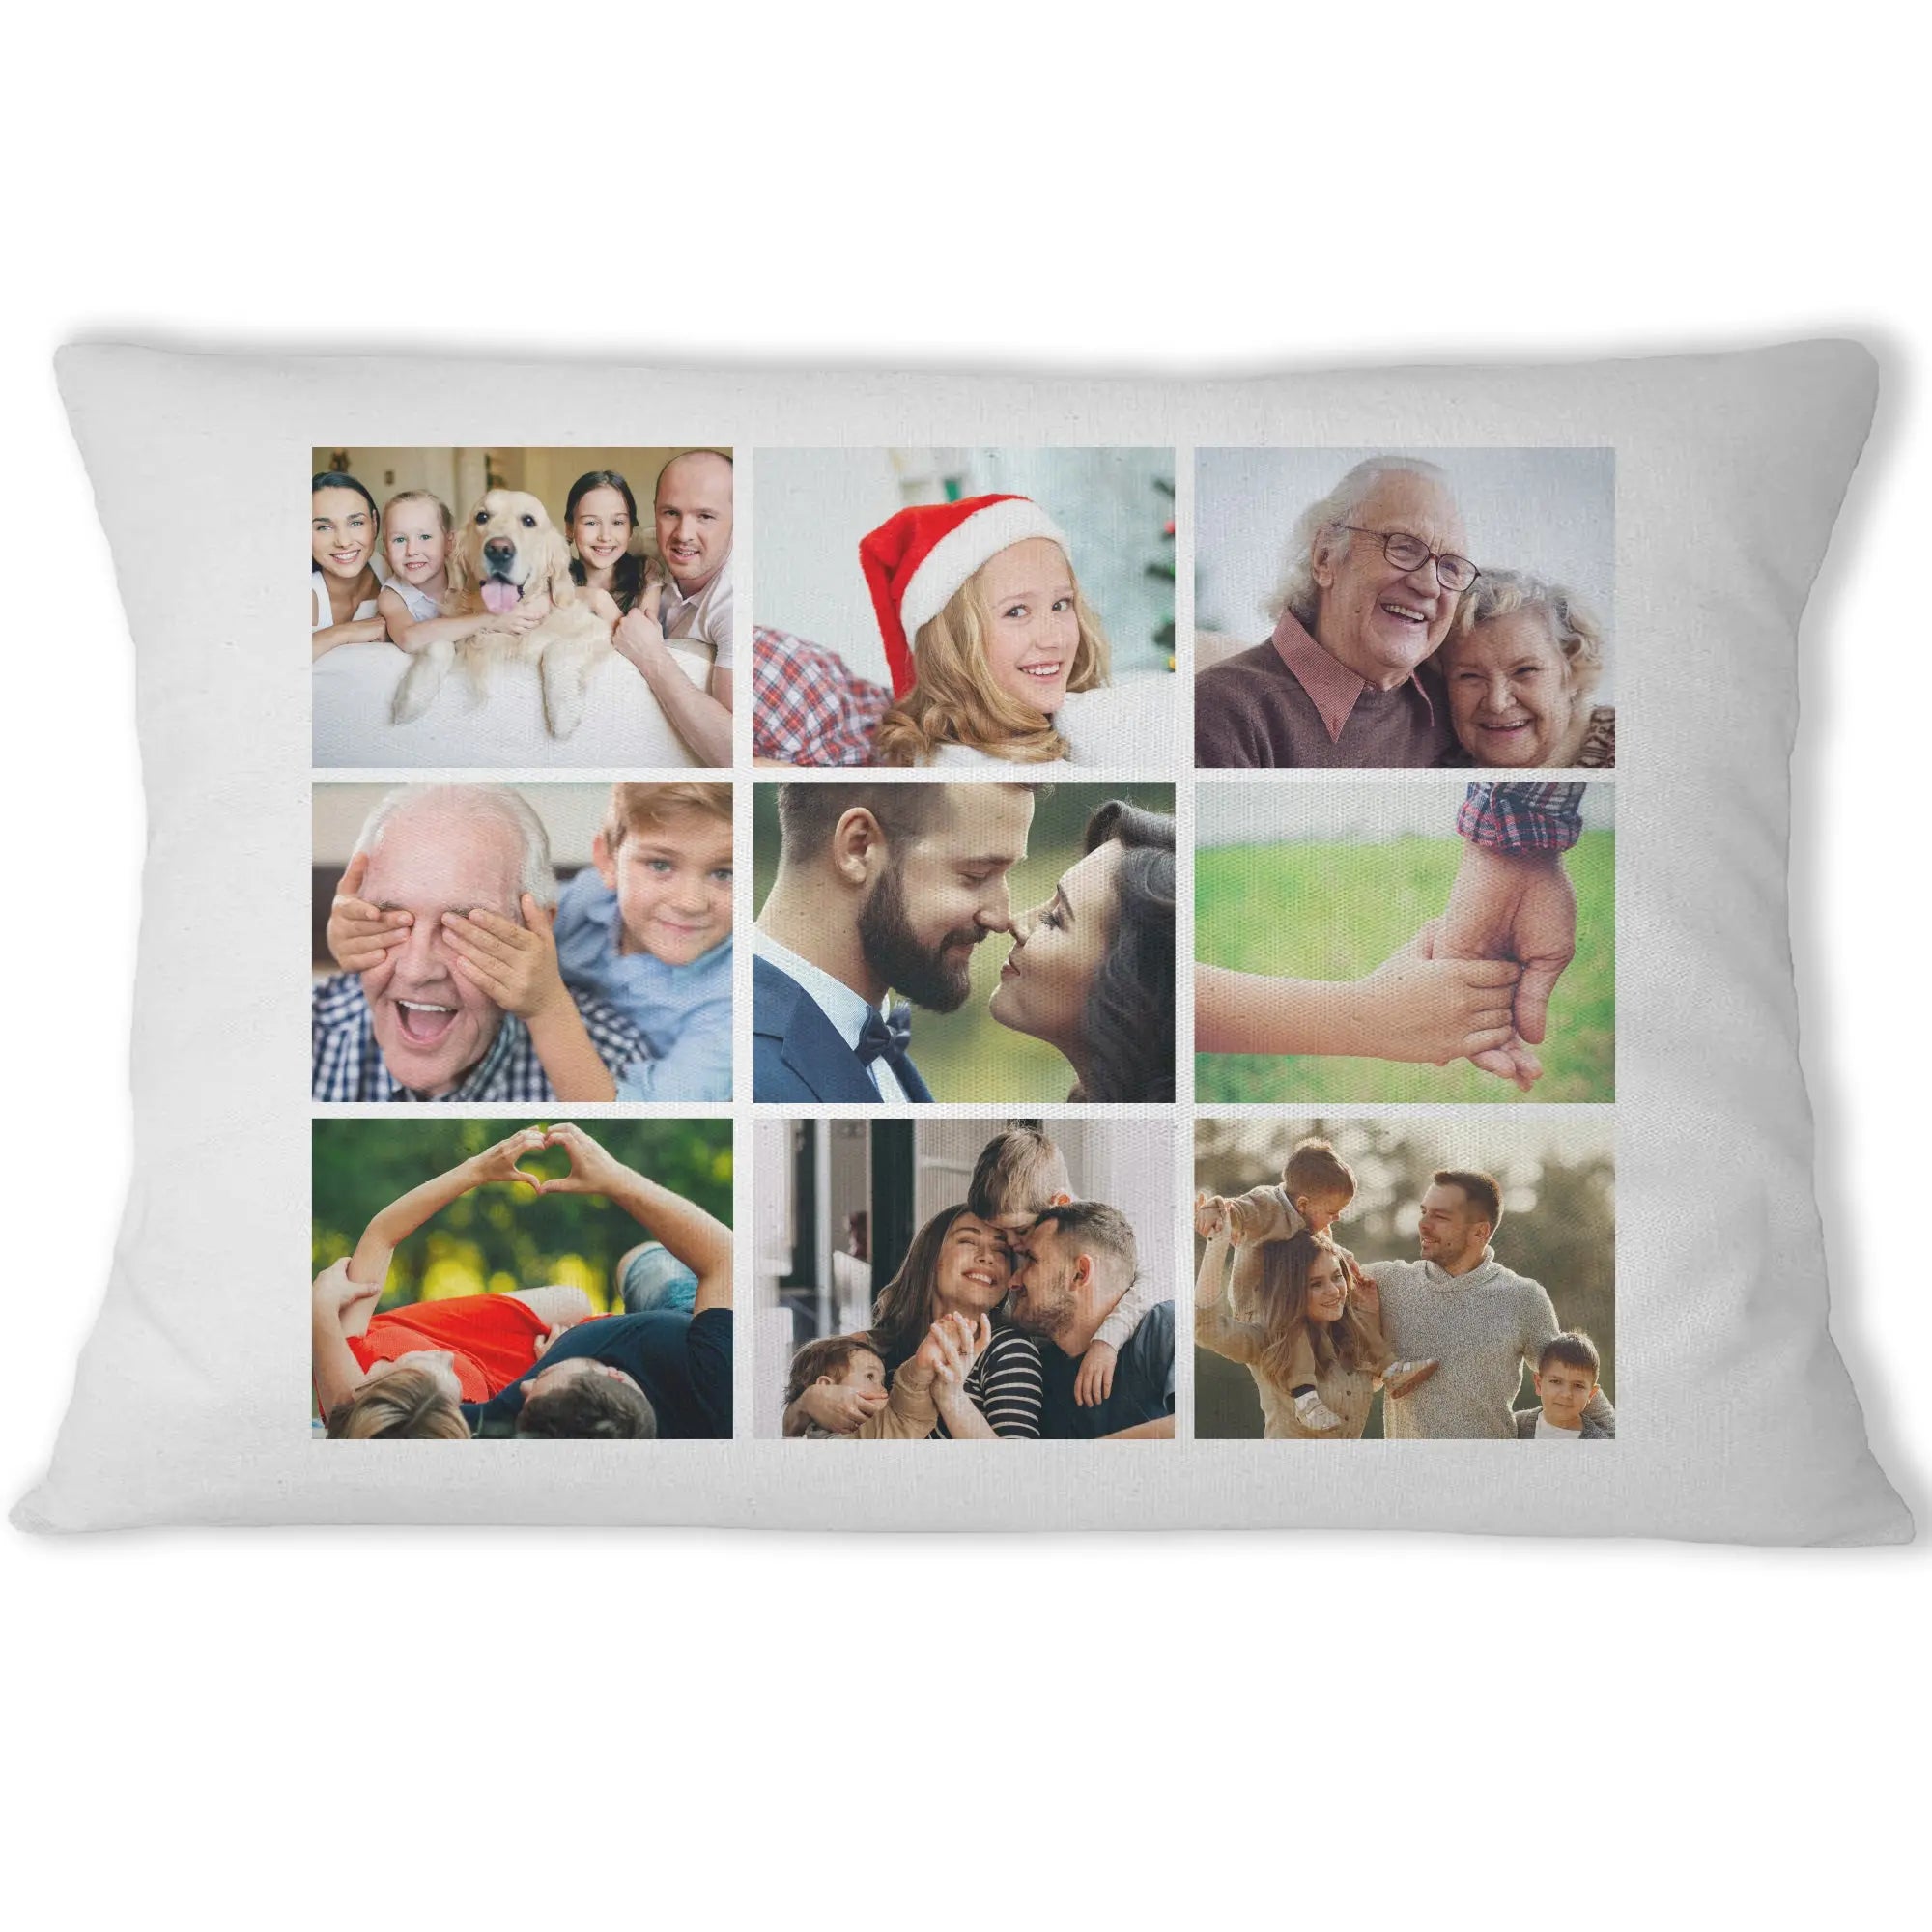 Personalised Photo Pillow case - 9 Images - Fully Customisable